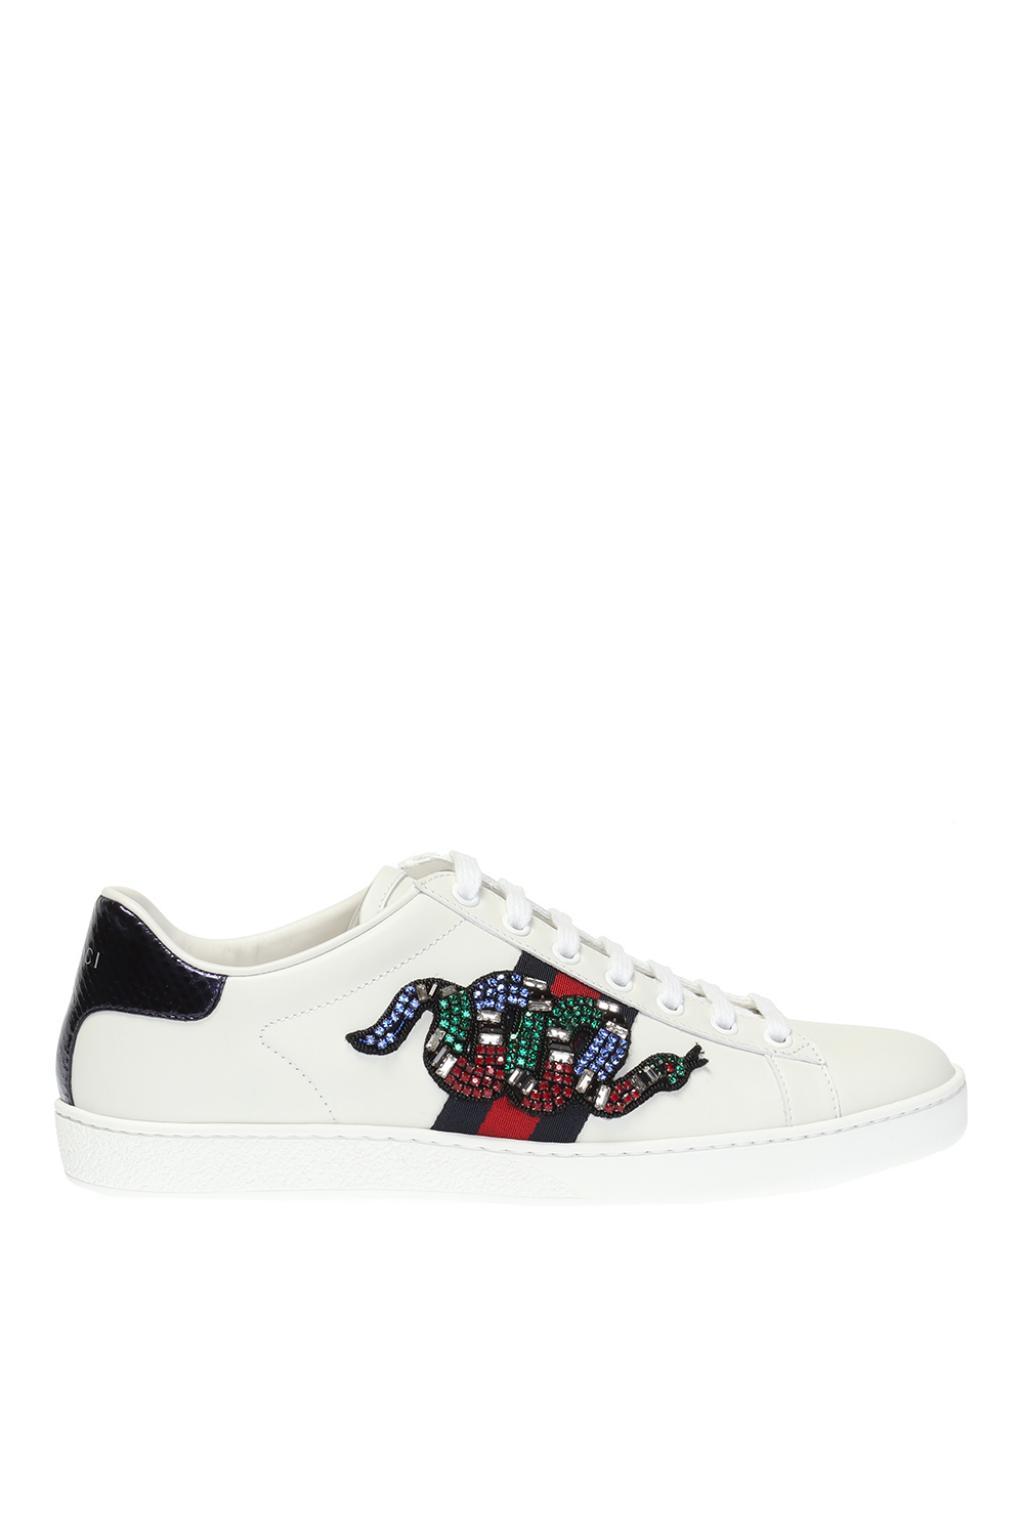 Get used to Bonus boy Gucci 'ace' Snake Motif Sneakers in White | Lyst